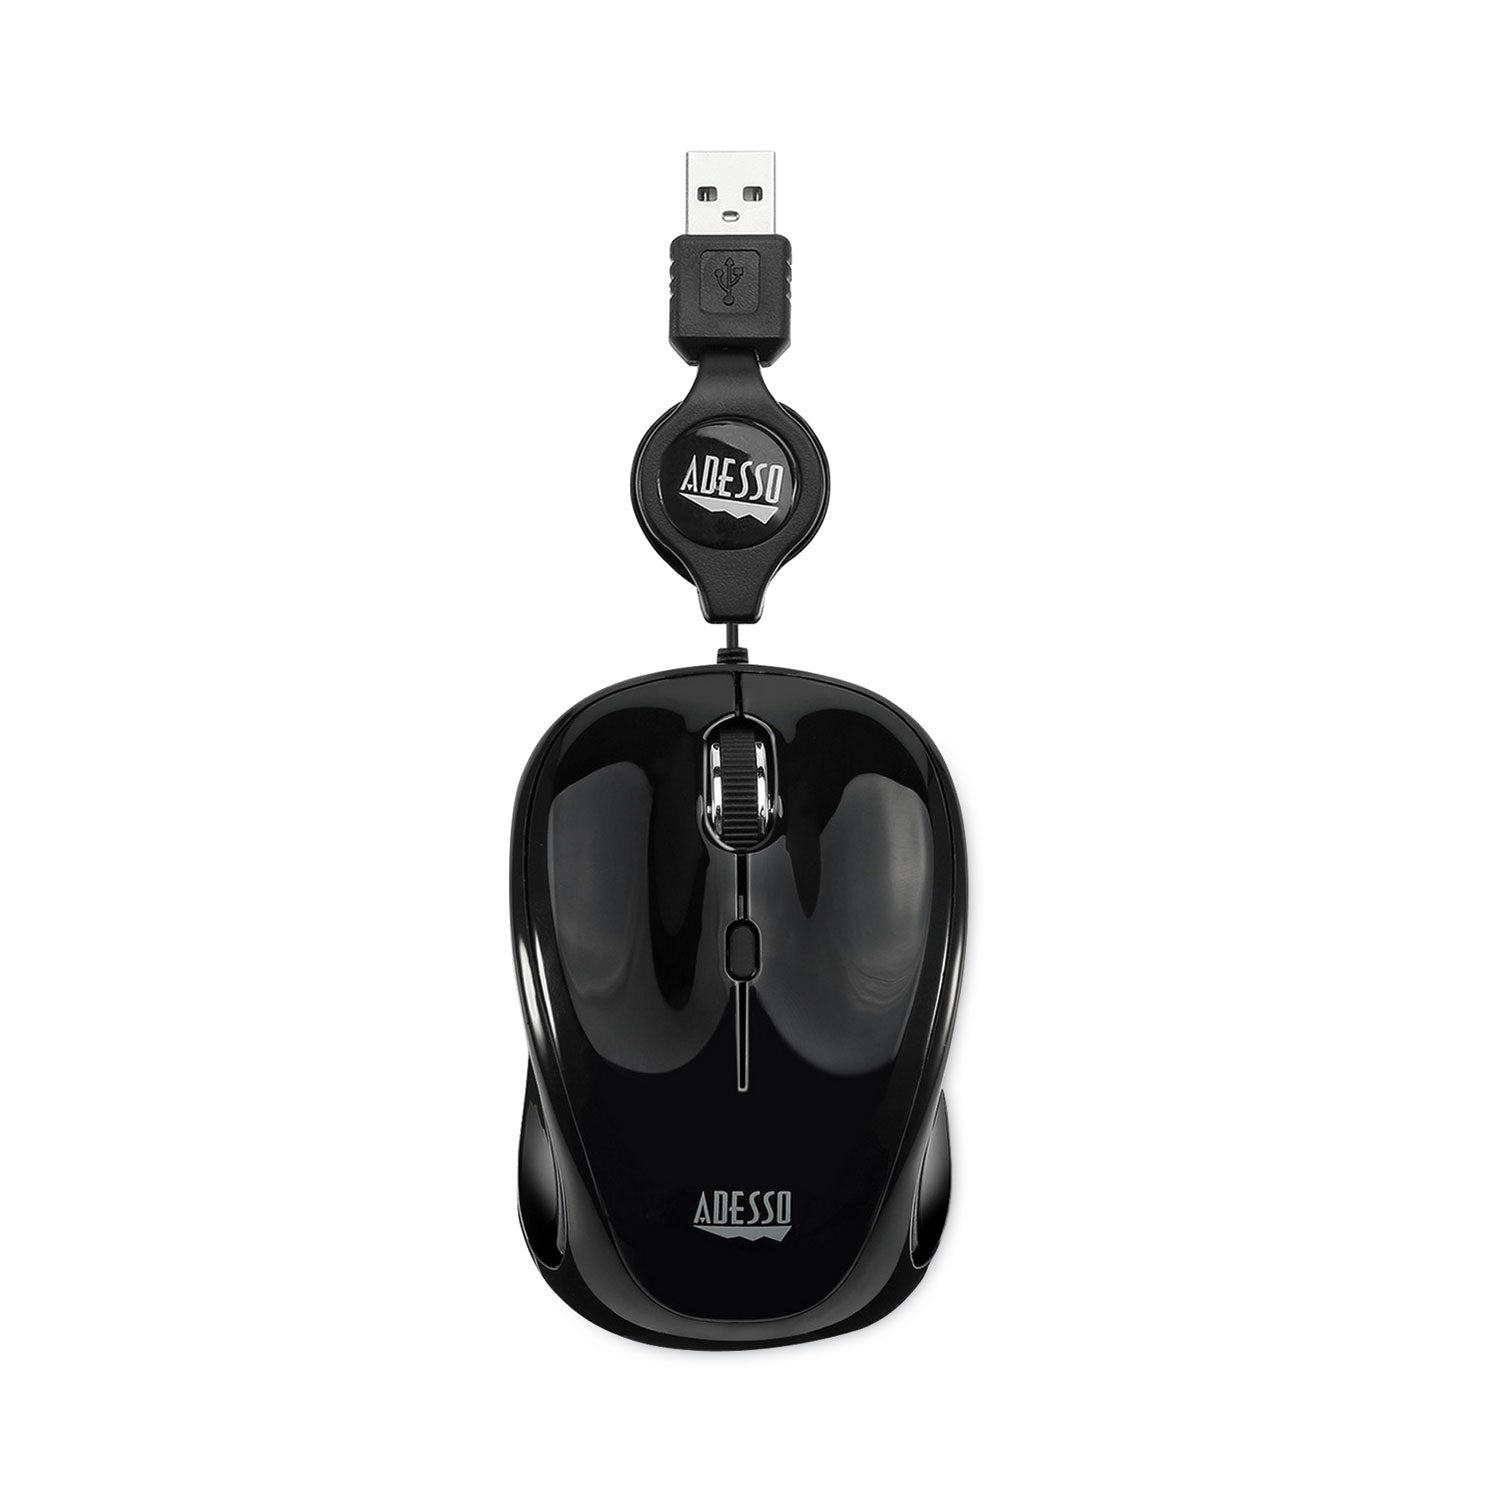 illuminated-retractable-mouse-usb-20-left-right-hand-use-black_adeimouses8b - 1